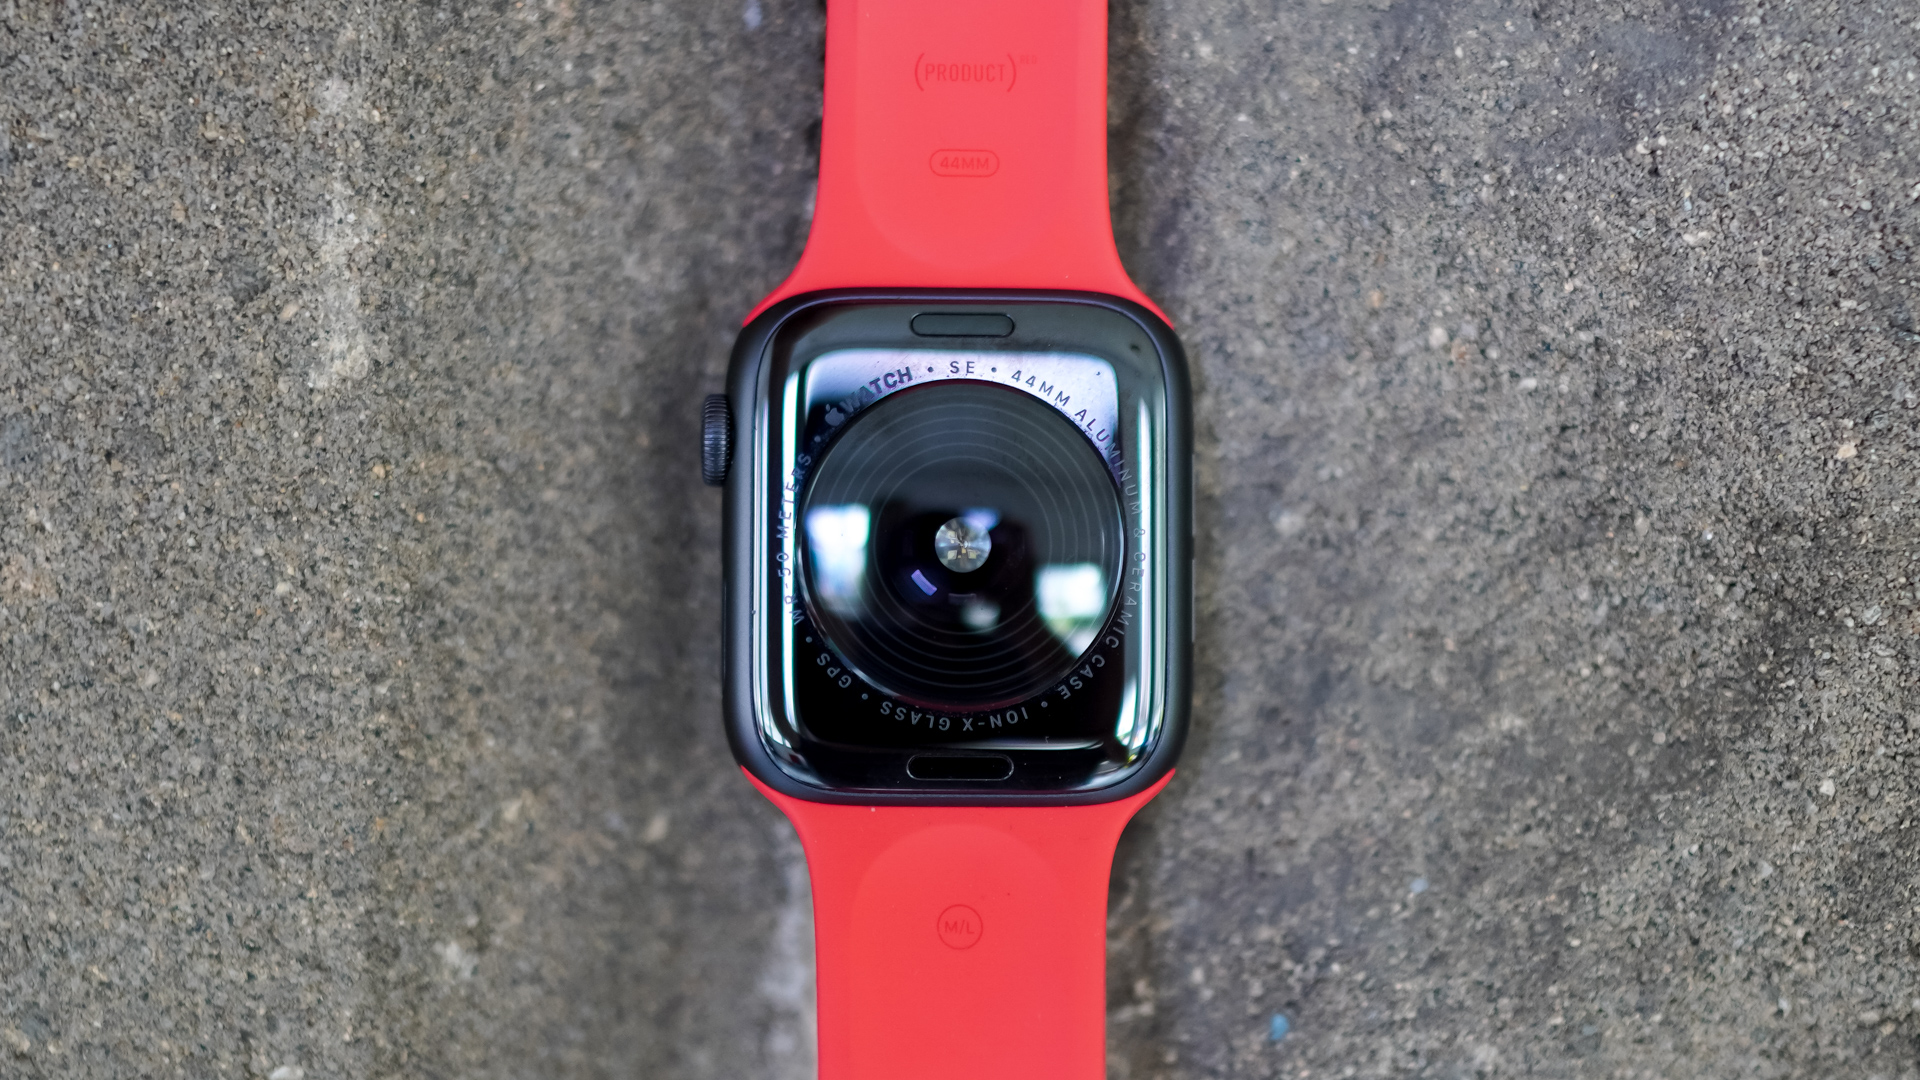 An Apple Watch SE rests face down on a stone surface showing the sensors on the back of the device.